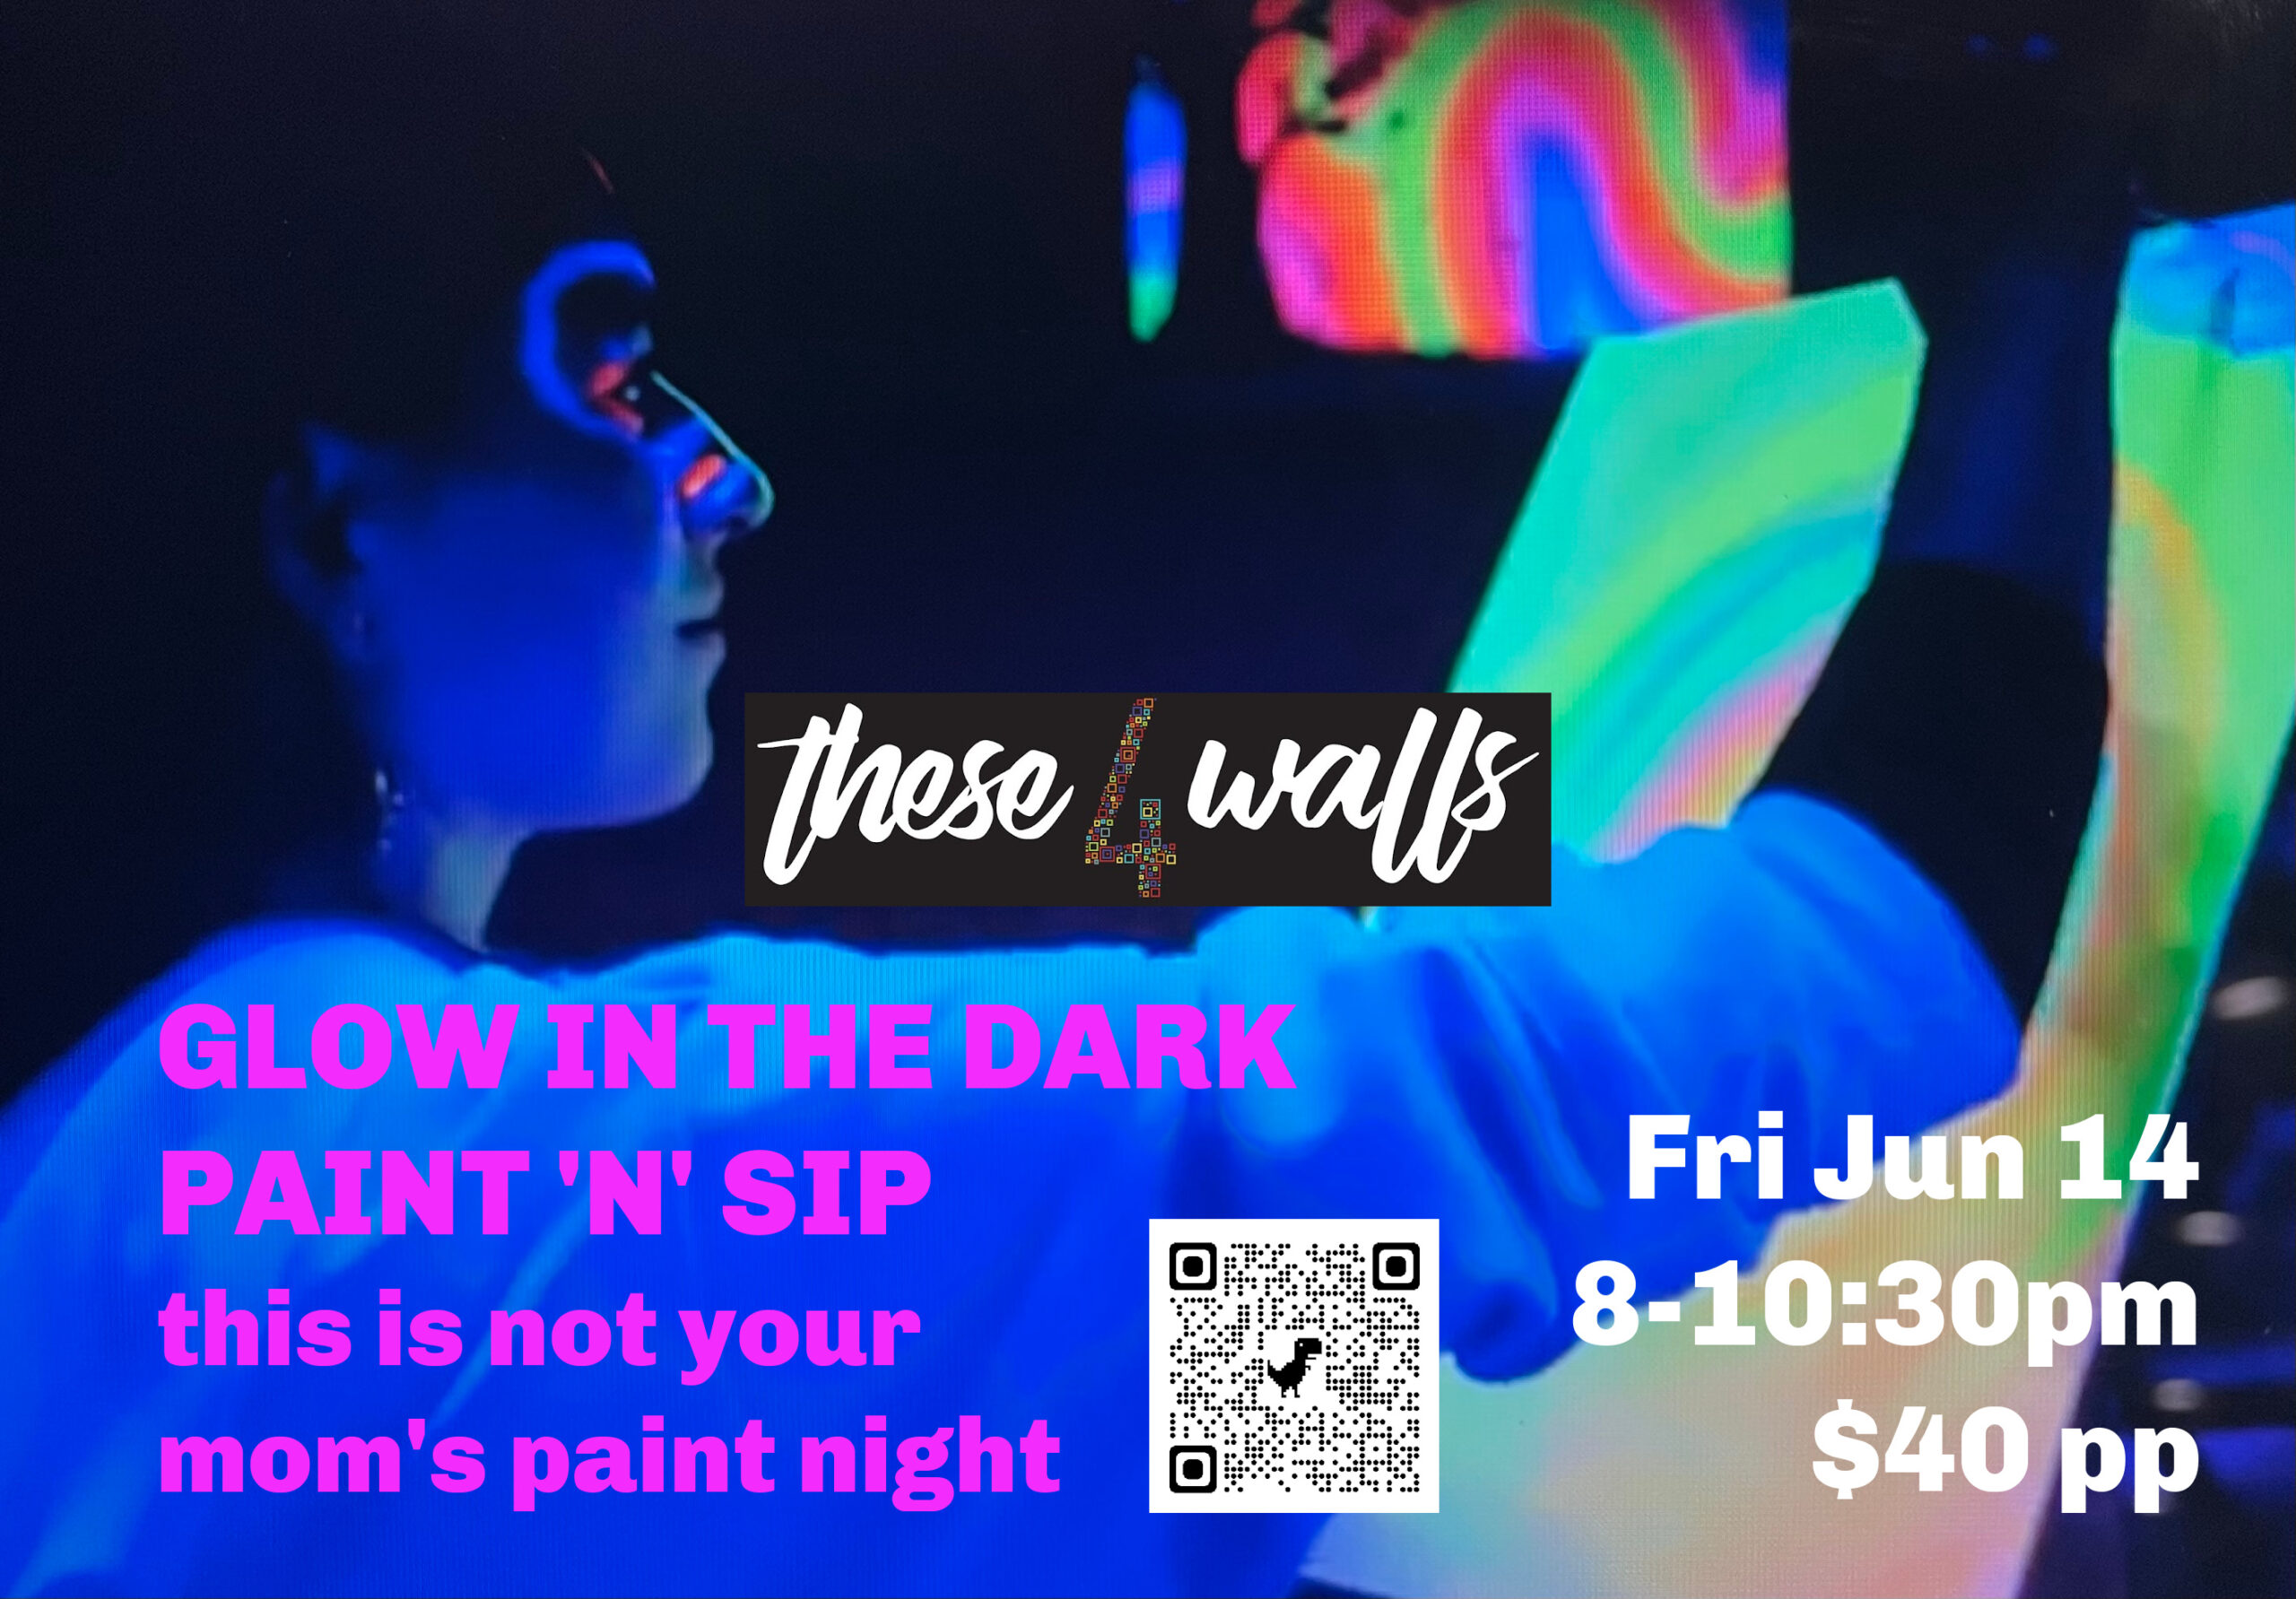 Photo of Glow in the dark painting. Also, has event details on it.